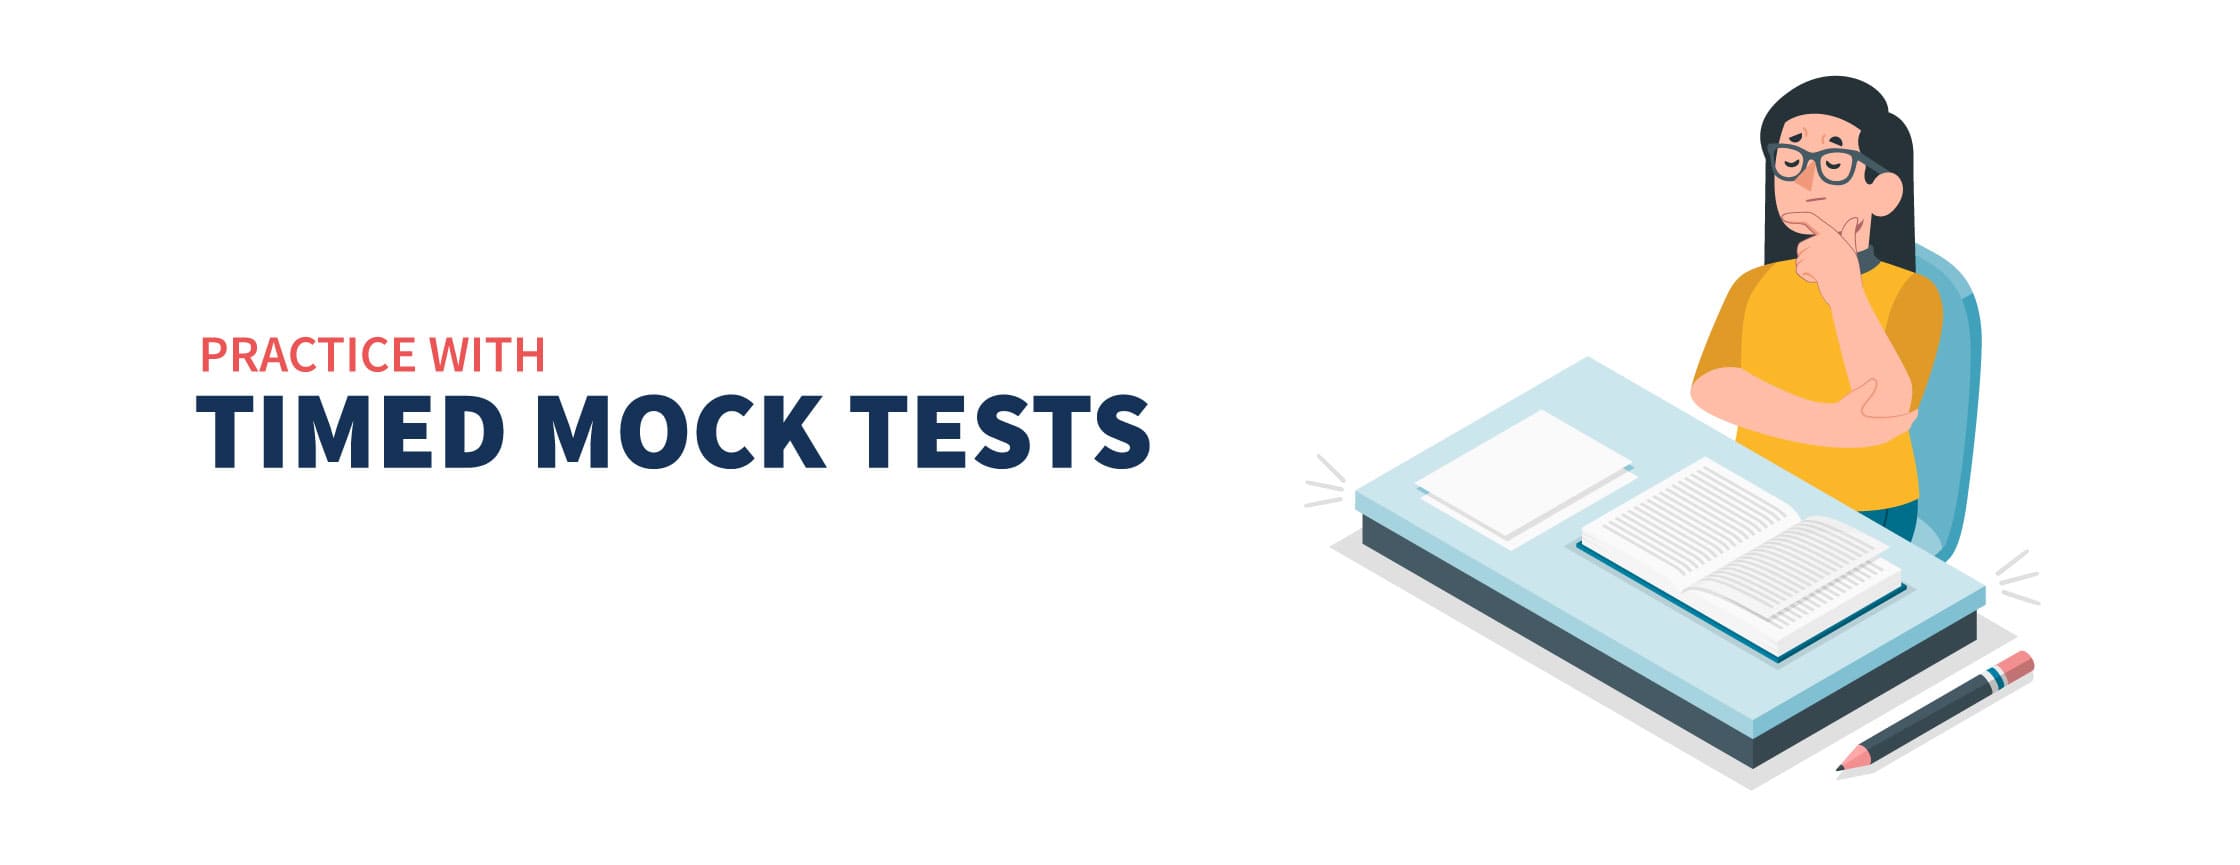 Practice with Timed Mock Tests